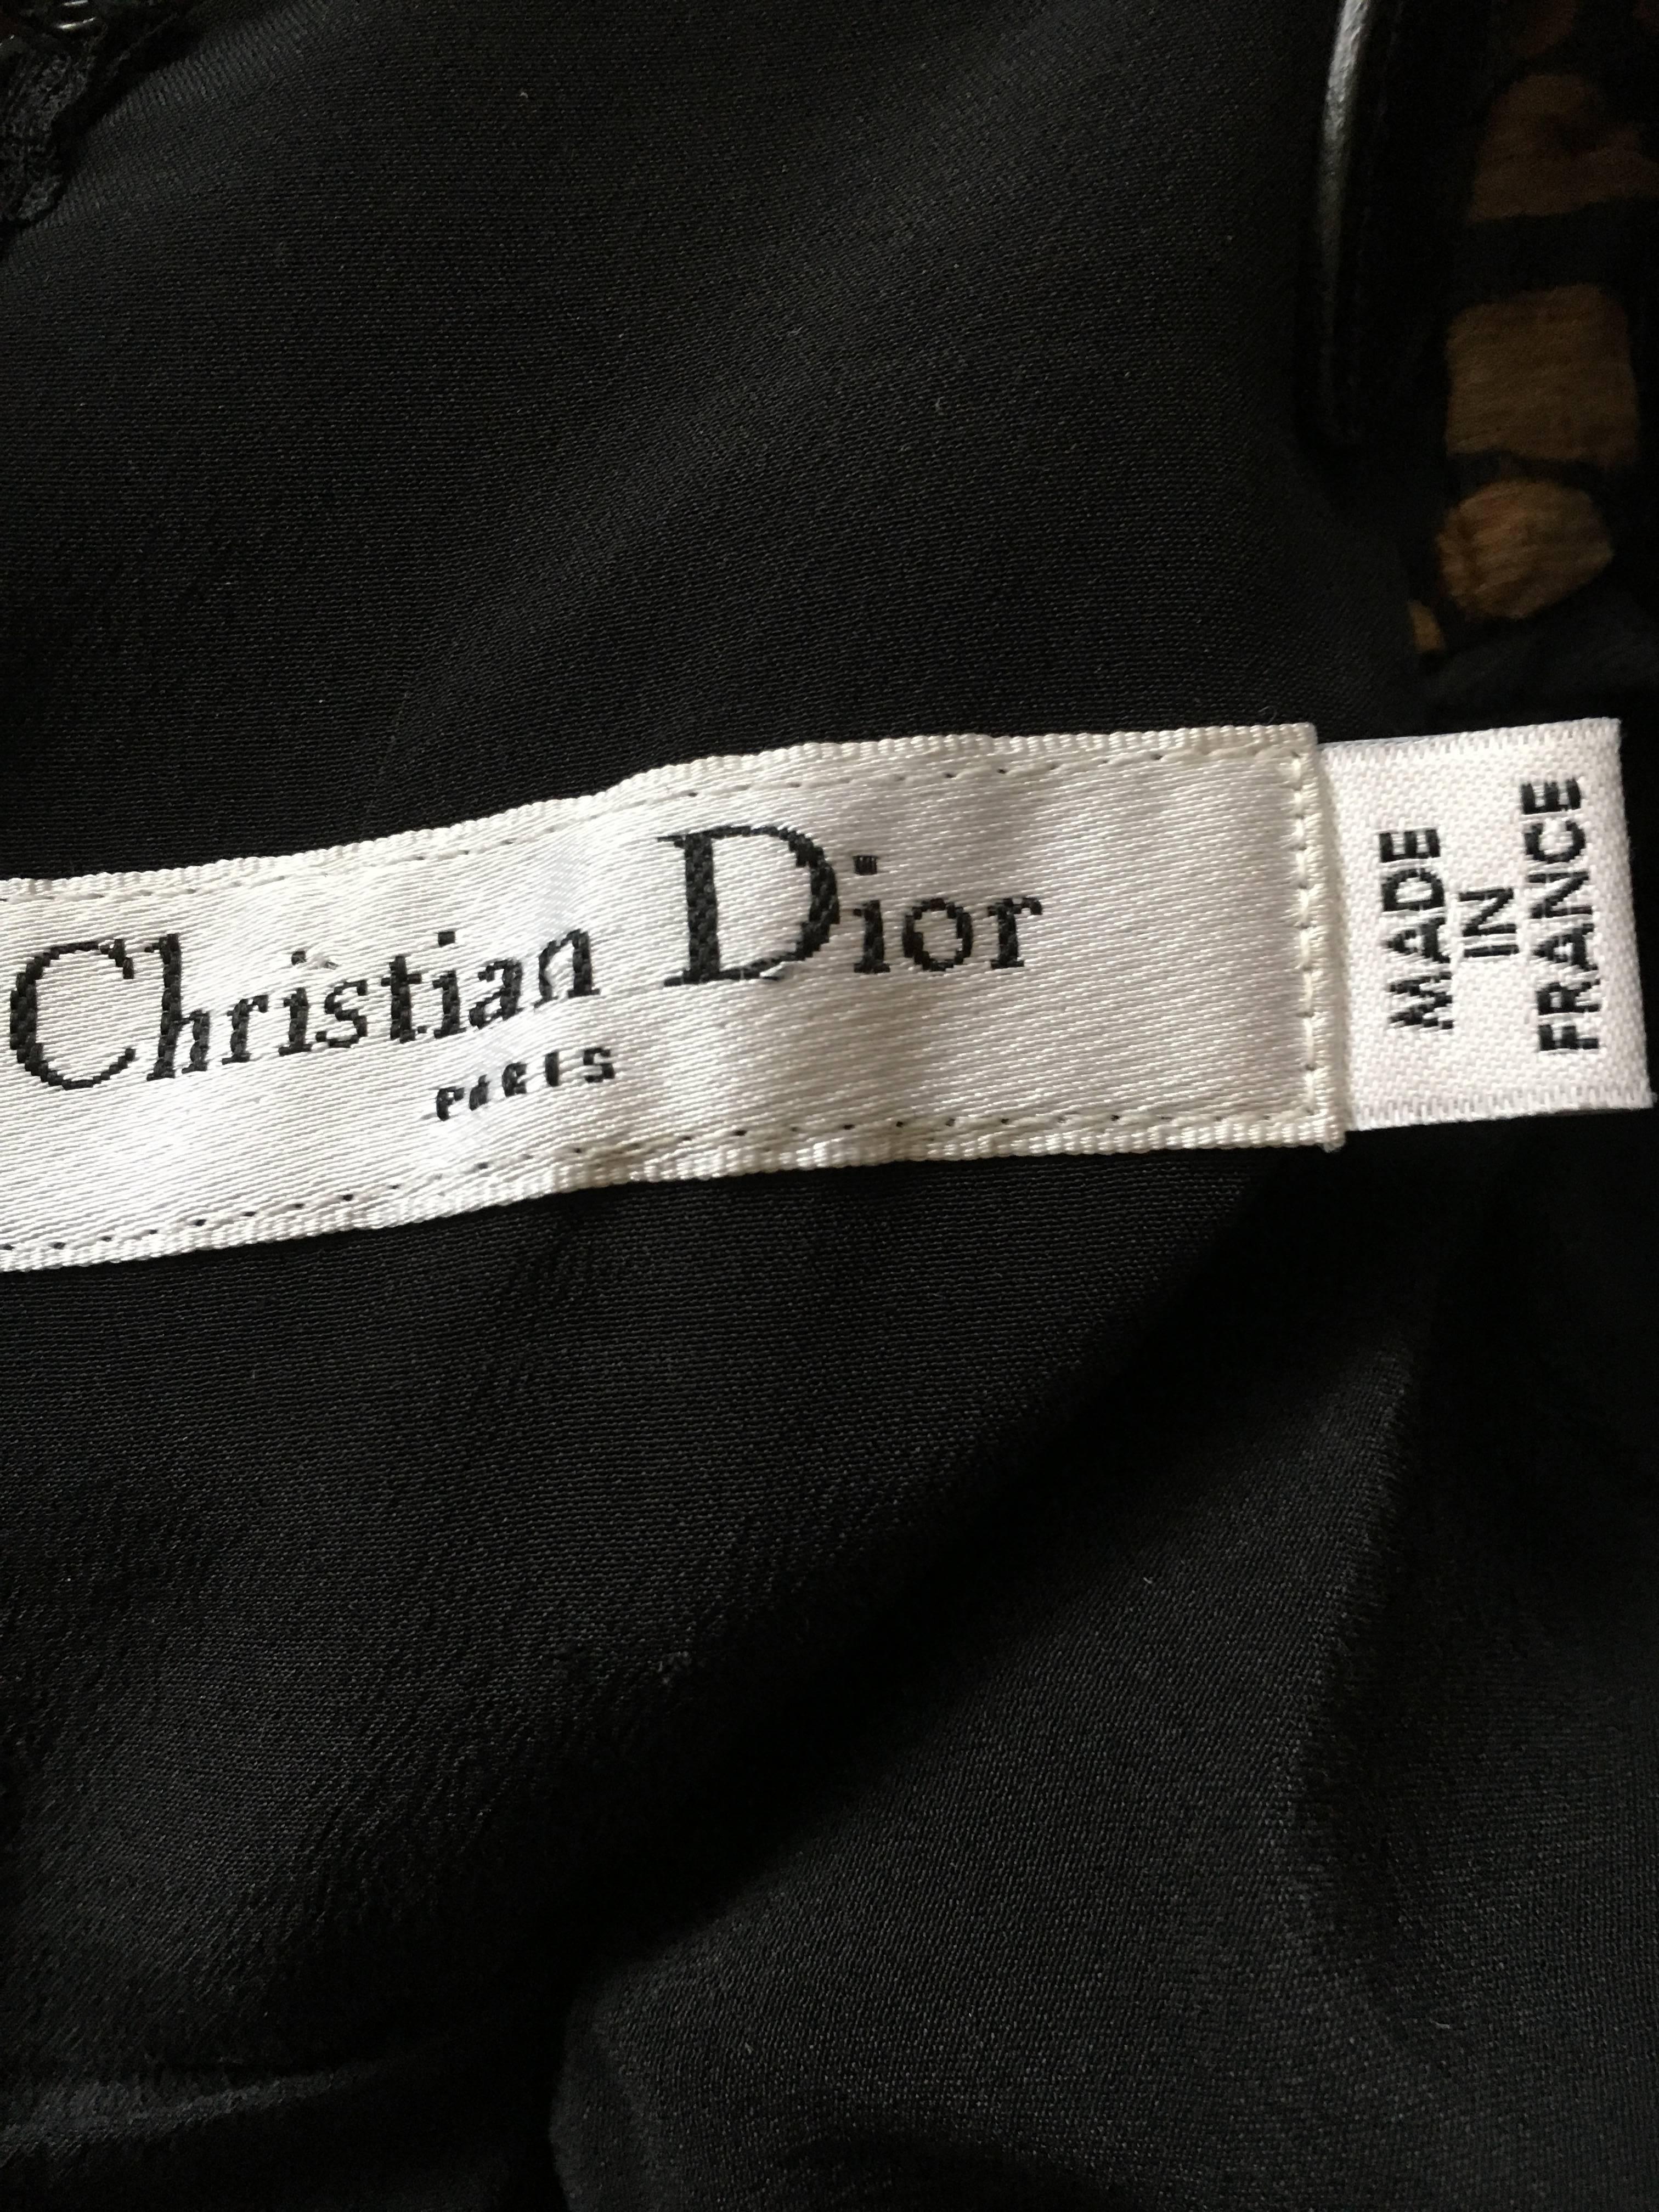 Dior by Galliano Silk Halter Mini Dress with Leather Bondage Strap Details For Sale 3